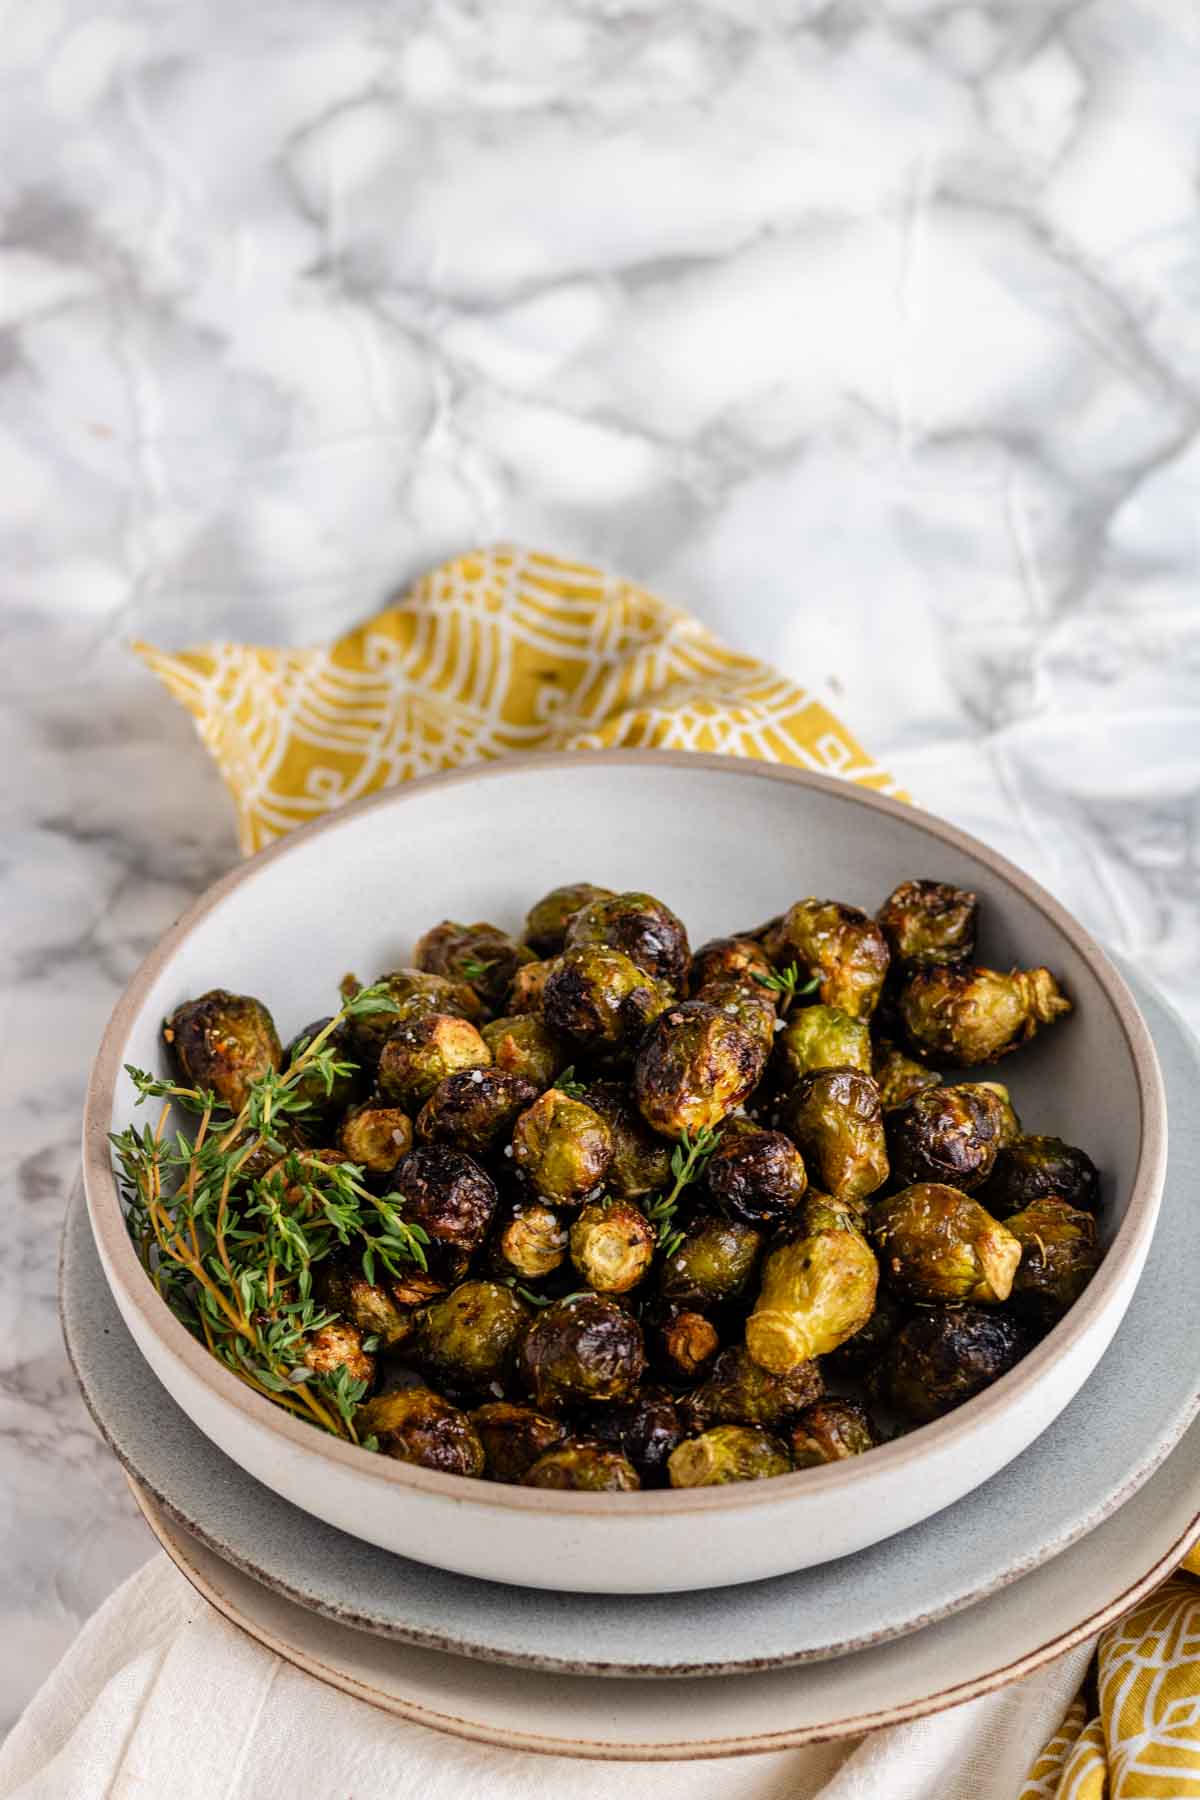 Roasted Brussels sprouts in a bowl.